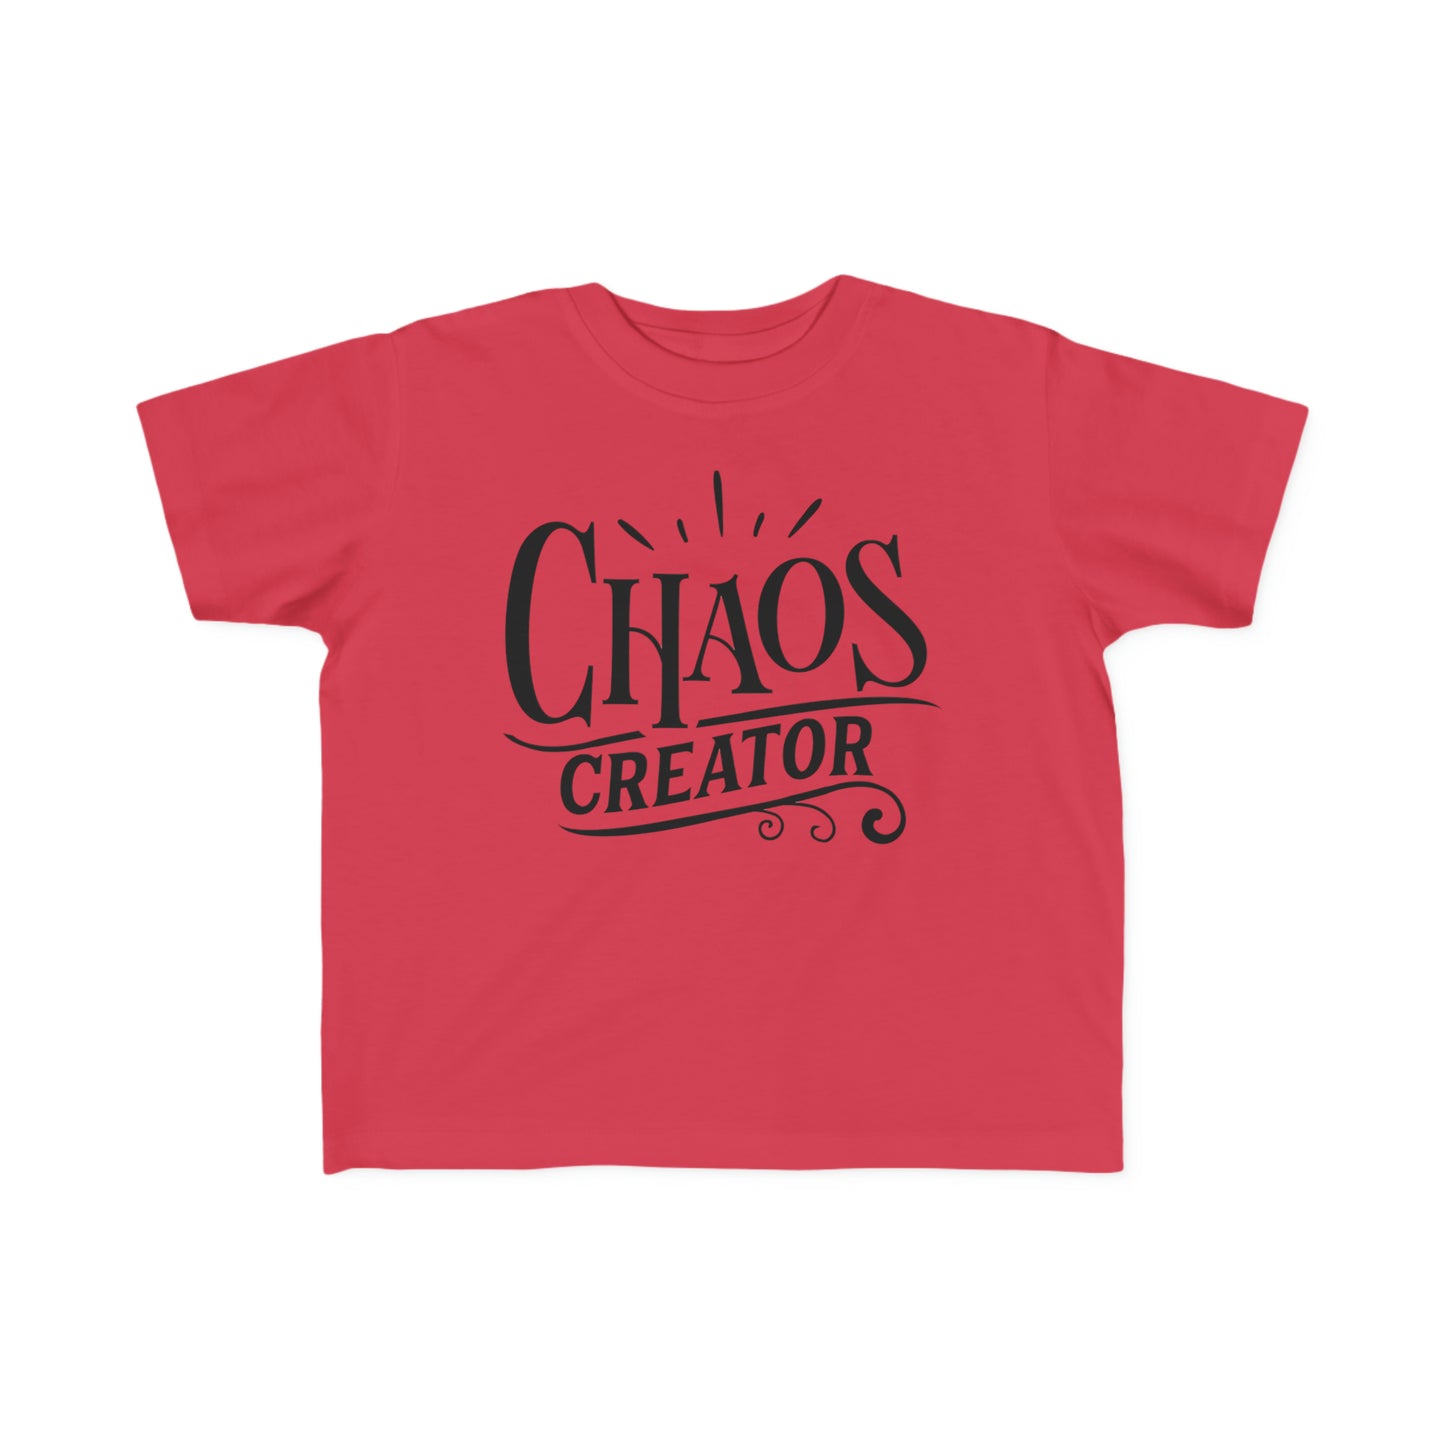 Chaos Creator Toddler's Fine Jersey Tee